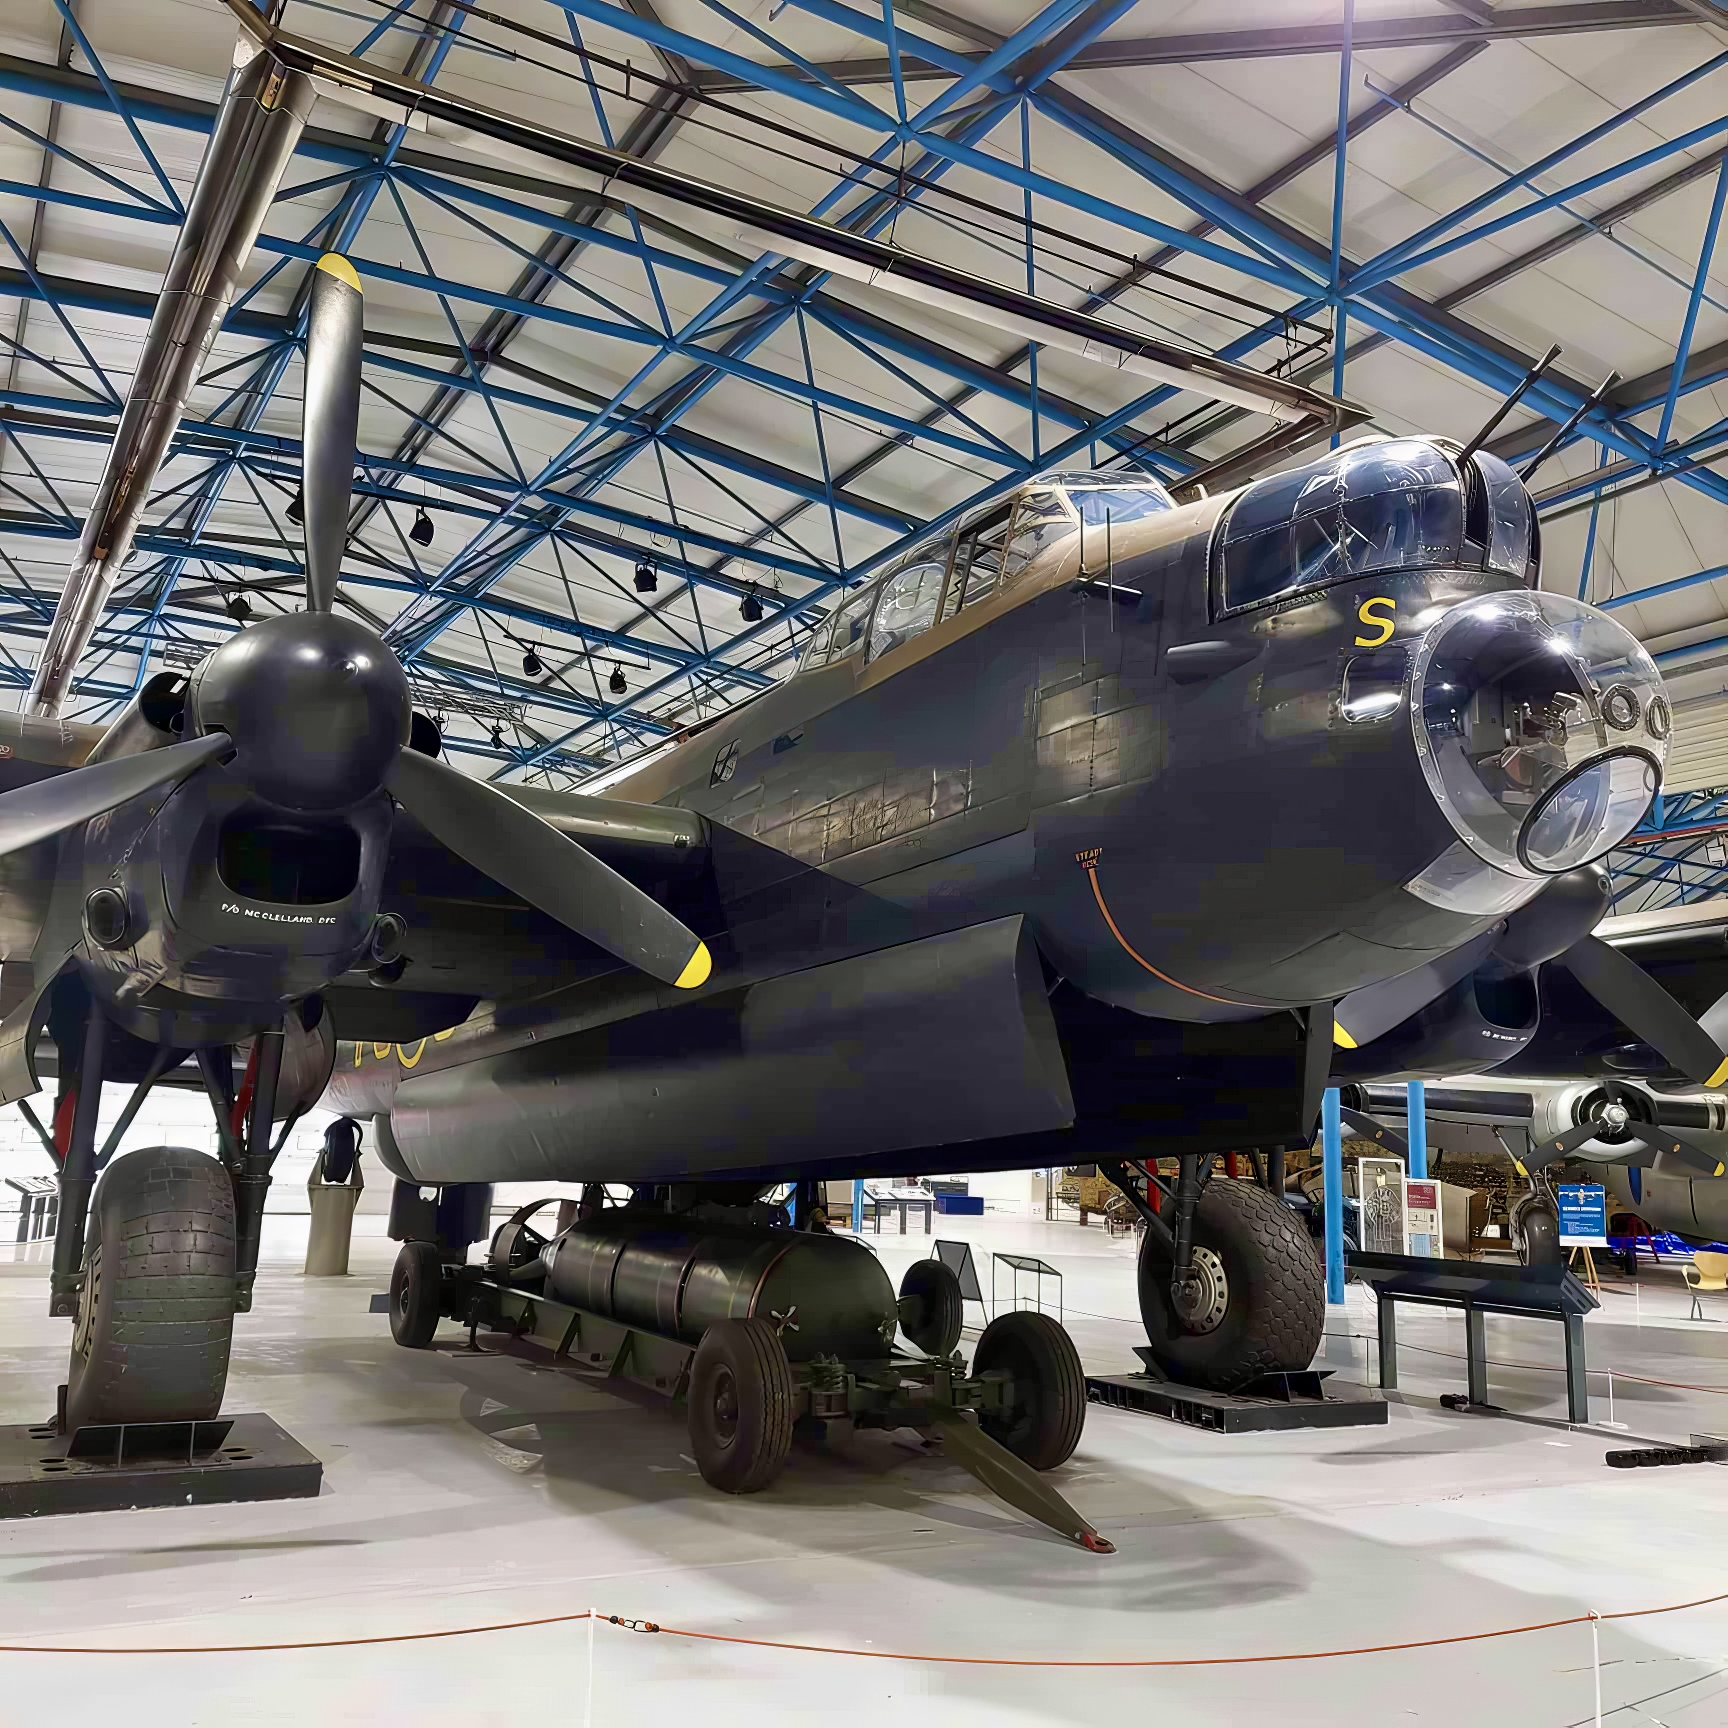 Vickers Wellington at RAF Museum, England